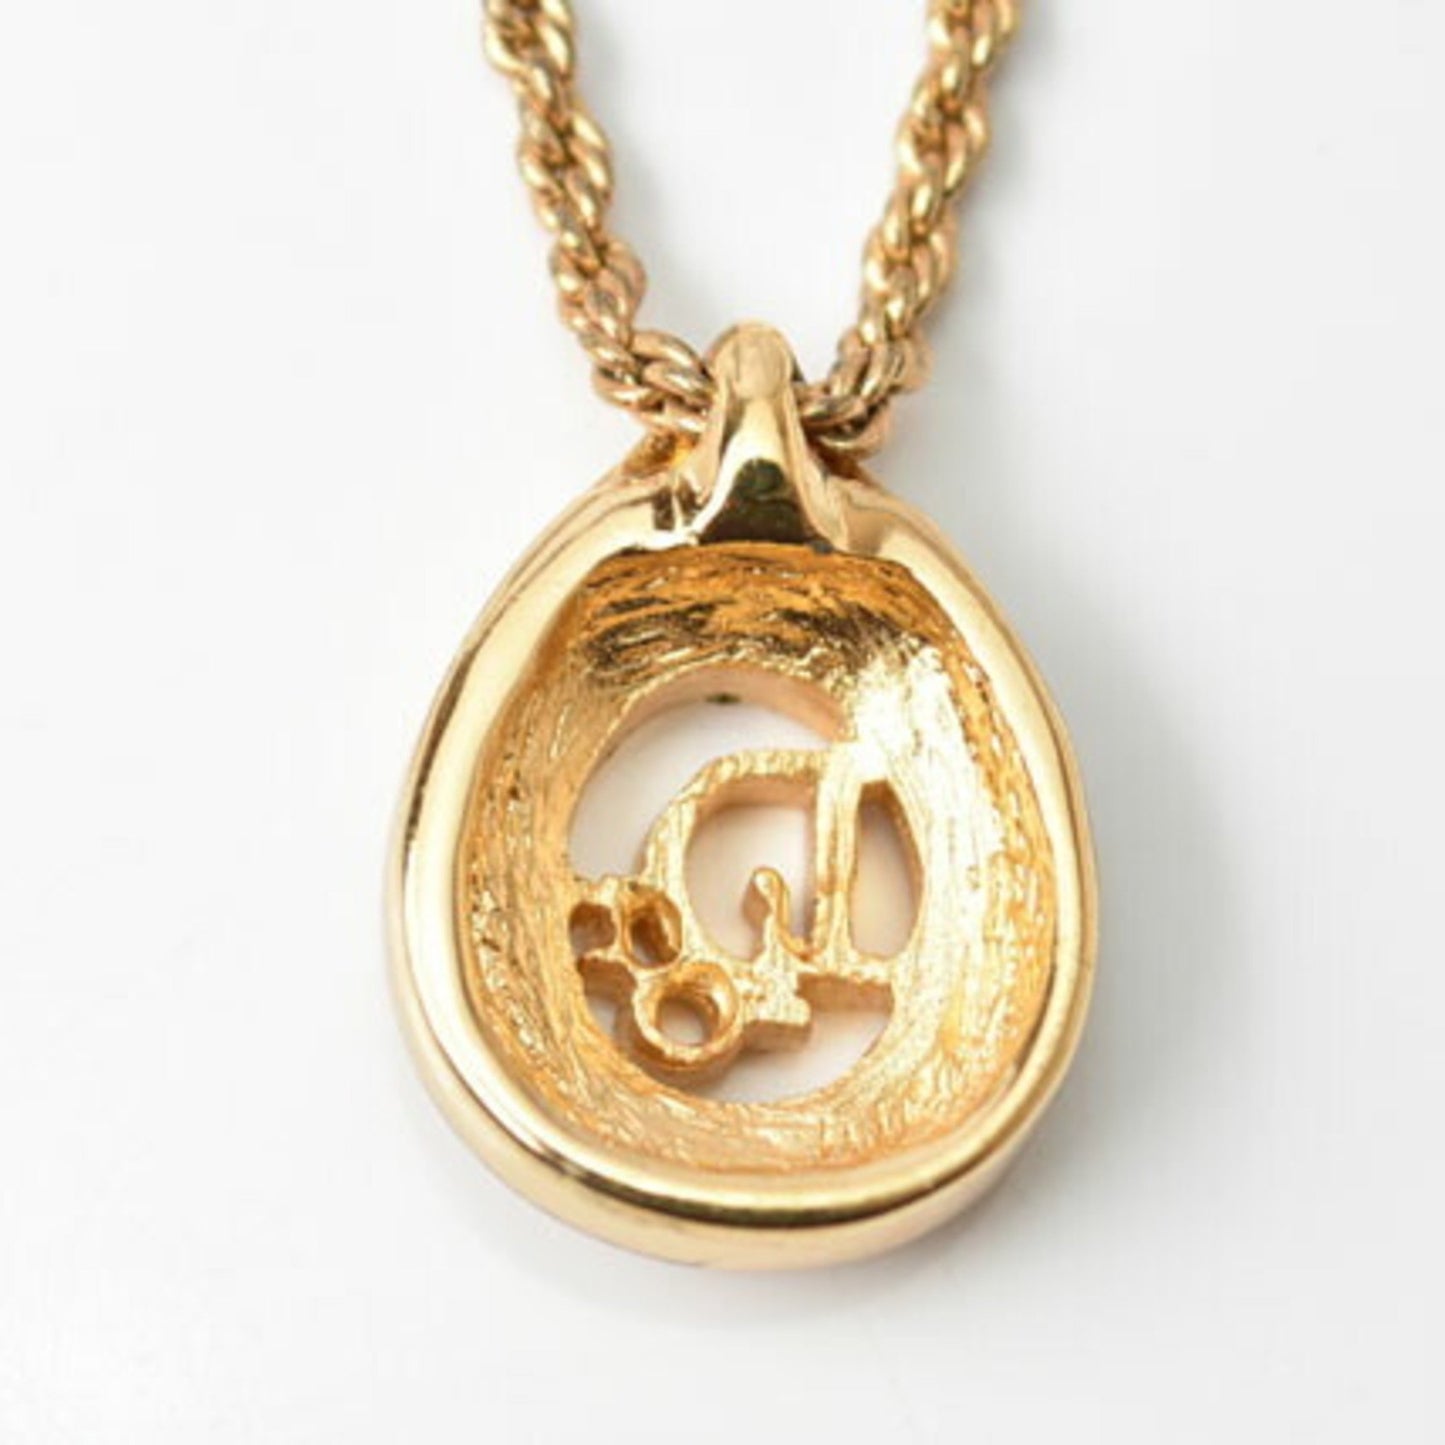 Dior Women's Gold Metal Pendant Necklace in Gold